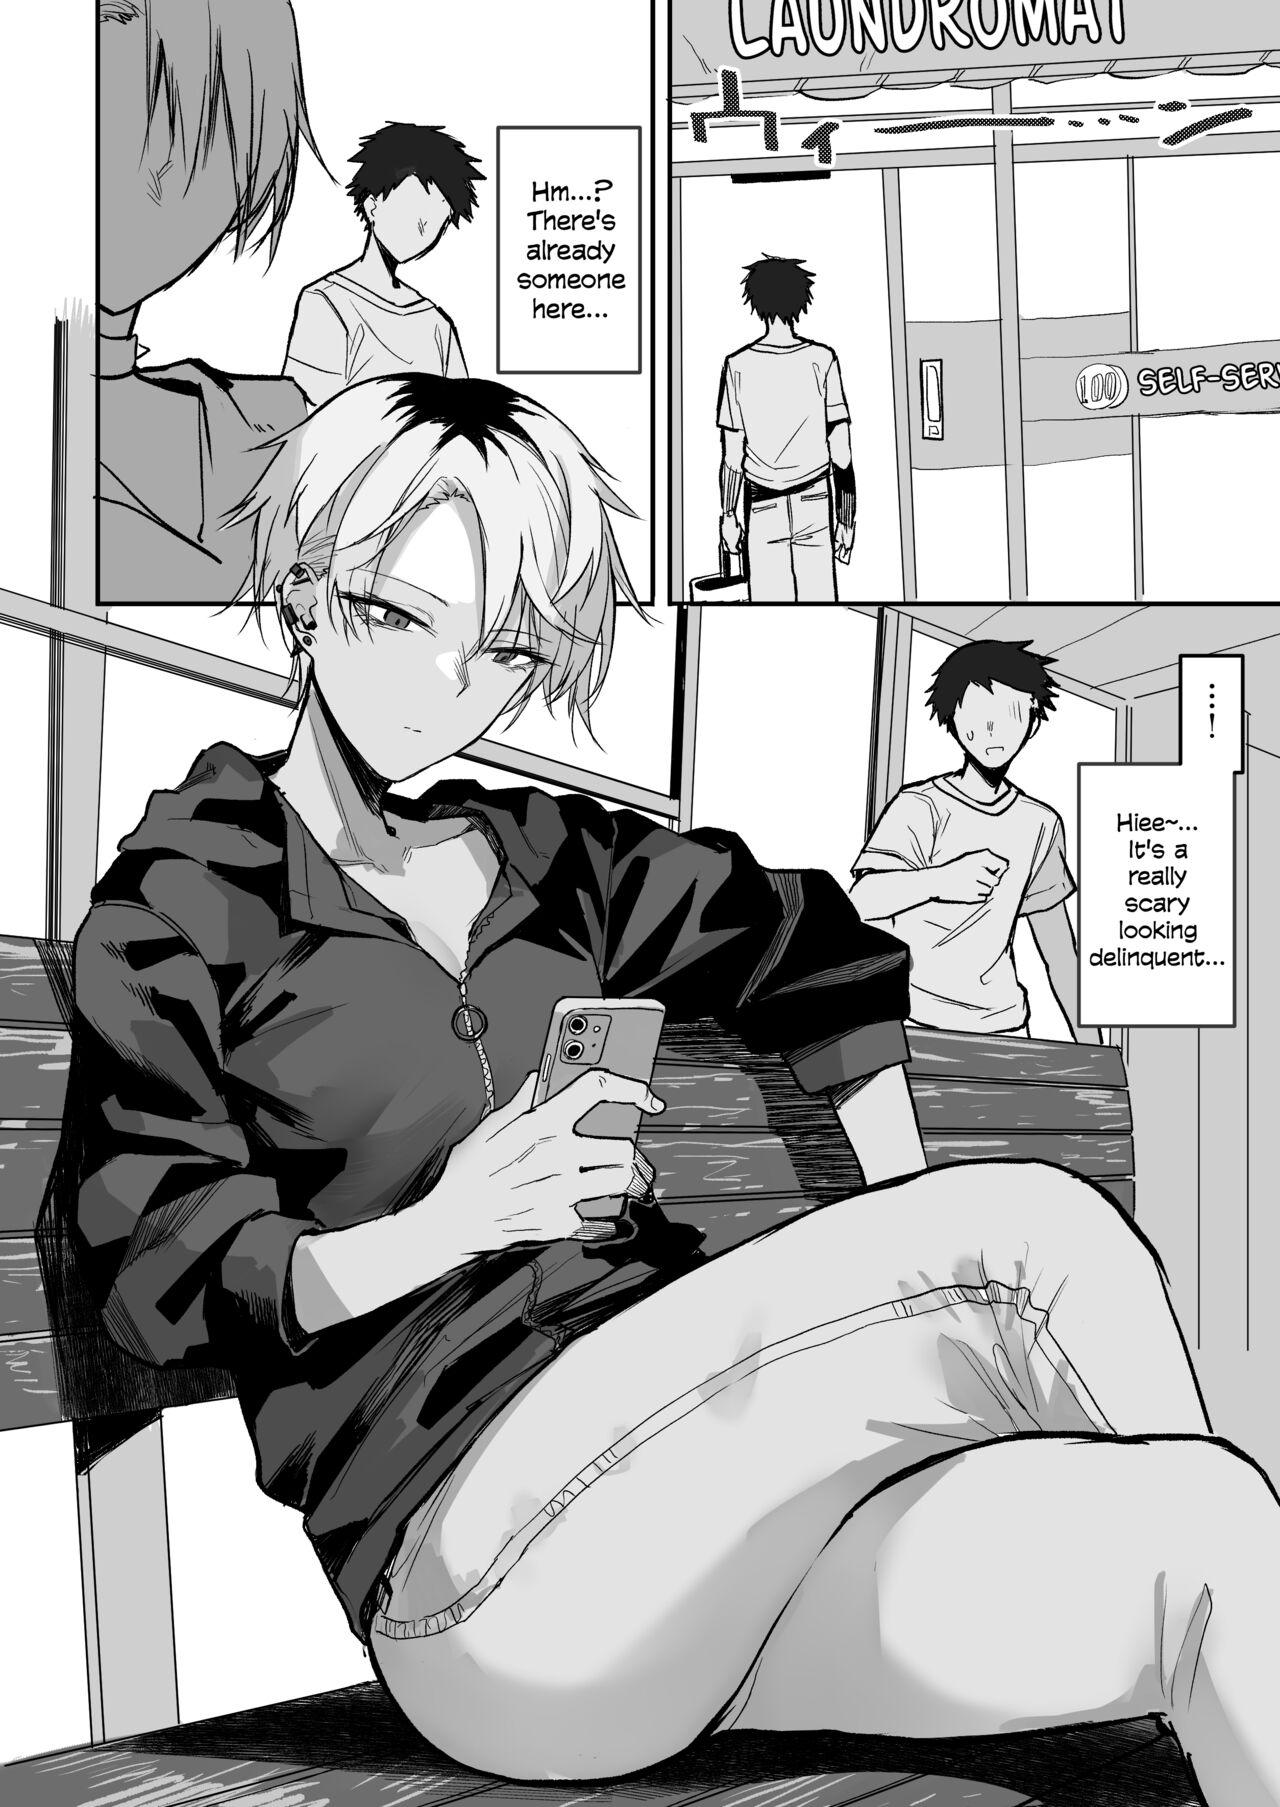 Erotic Coin Laundry de Kowai Yankee ni Karamareru Manga | A Manga About Getting Mixed Up With A Scary Delinquent At The Laundromat - Original Gorda - Picture 1